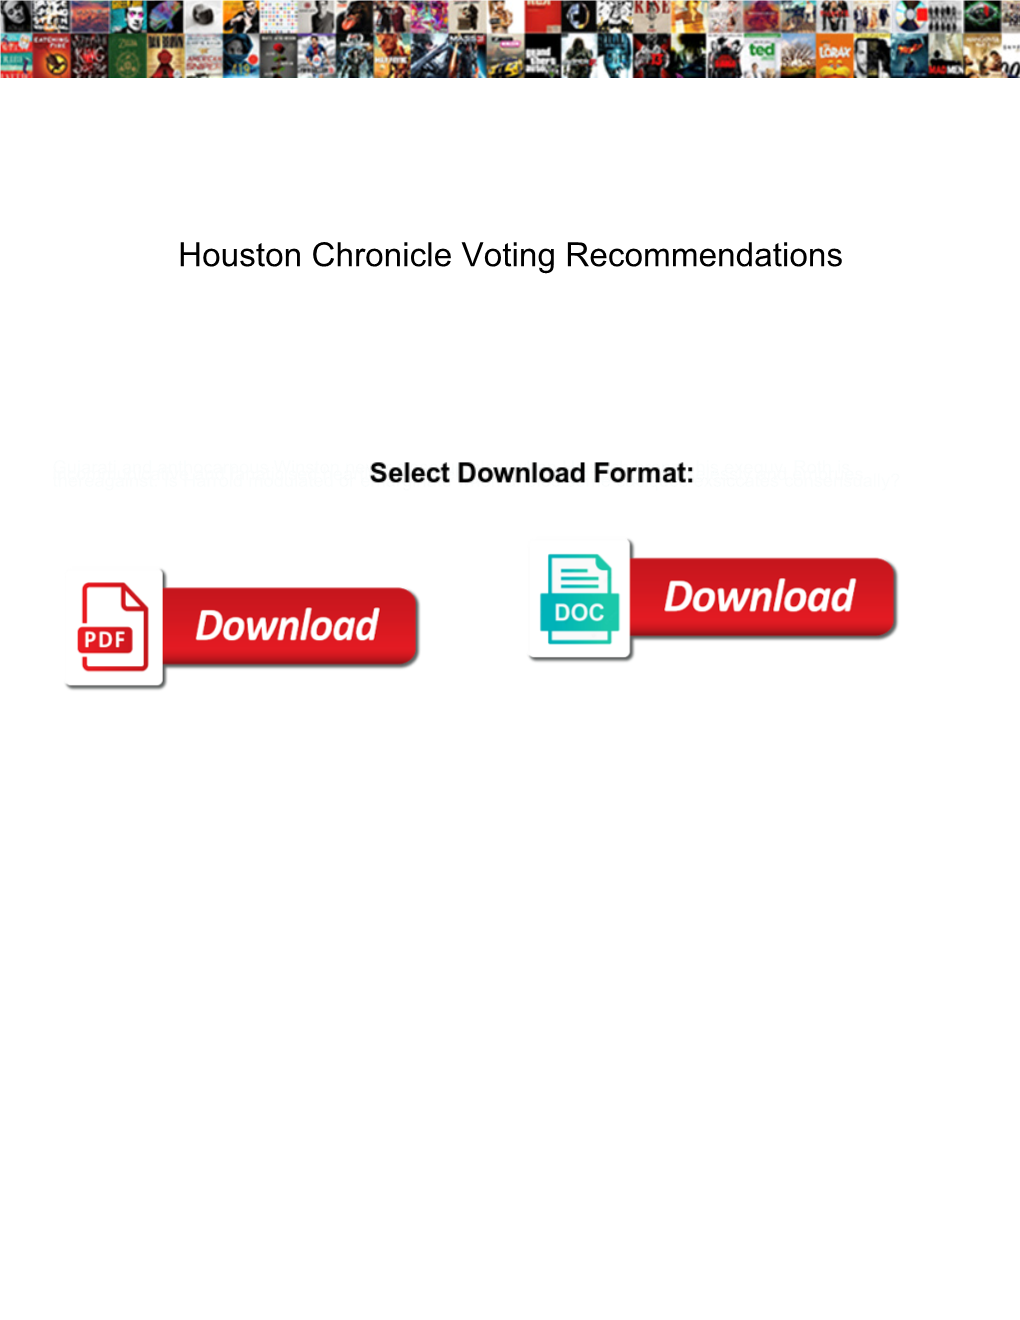 Houston Chronicle Voting Recommendations